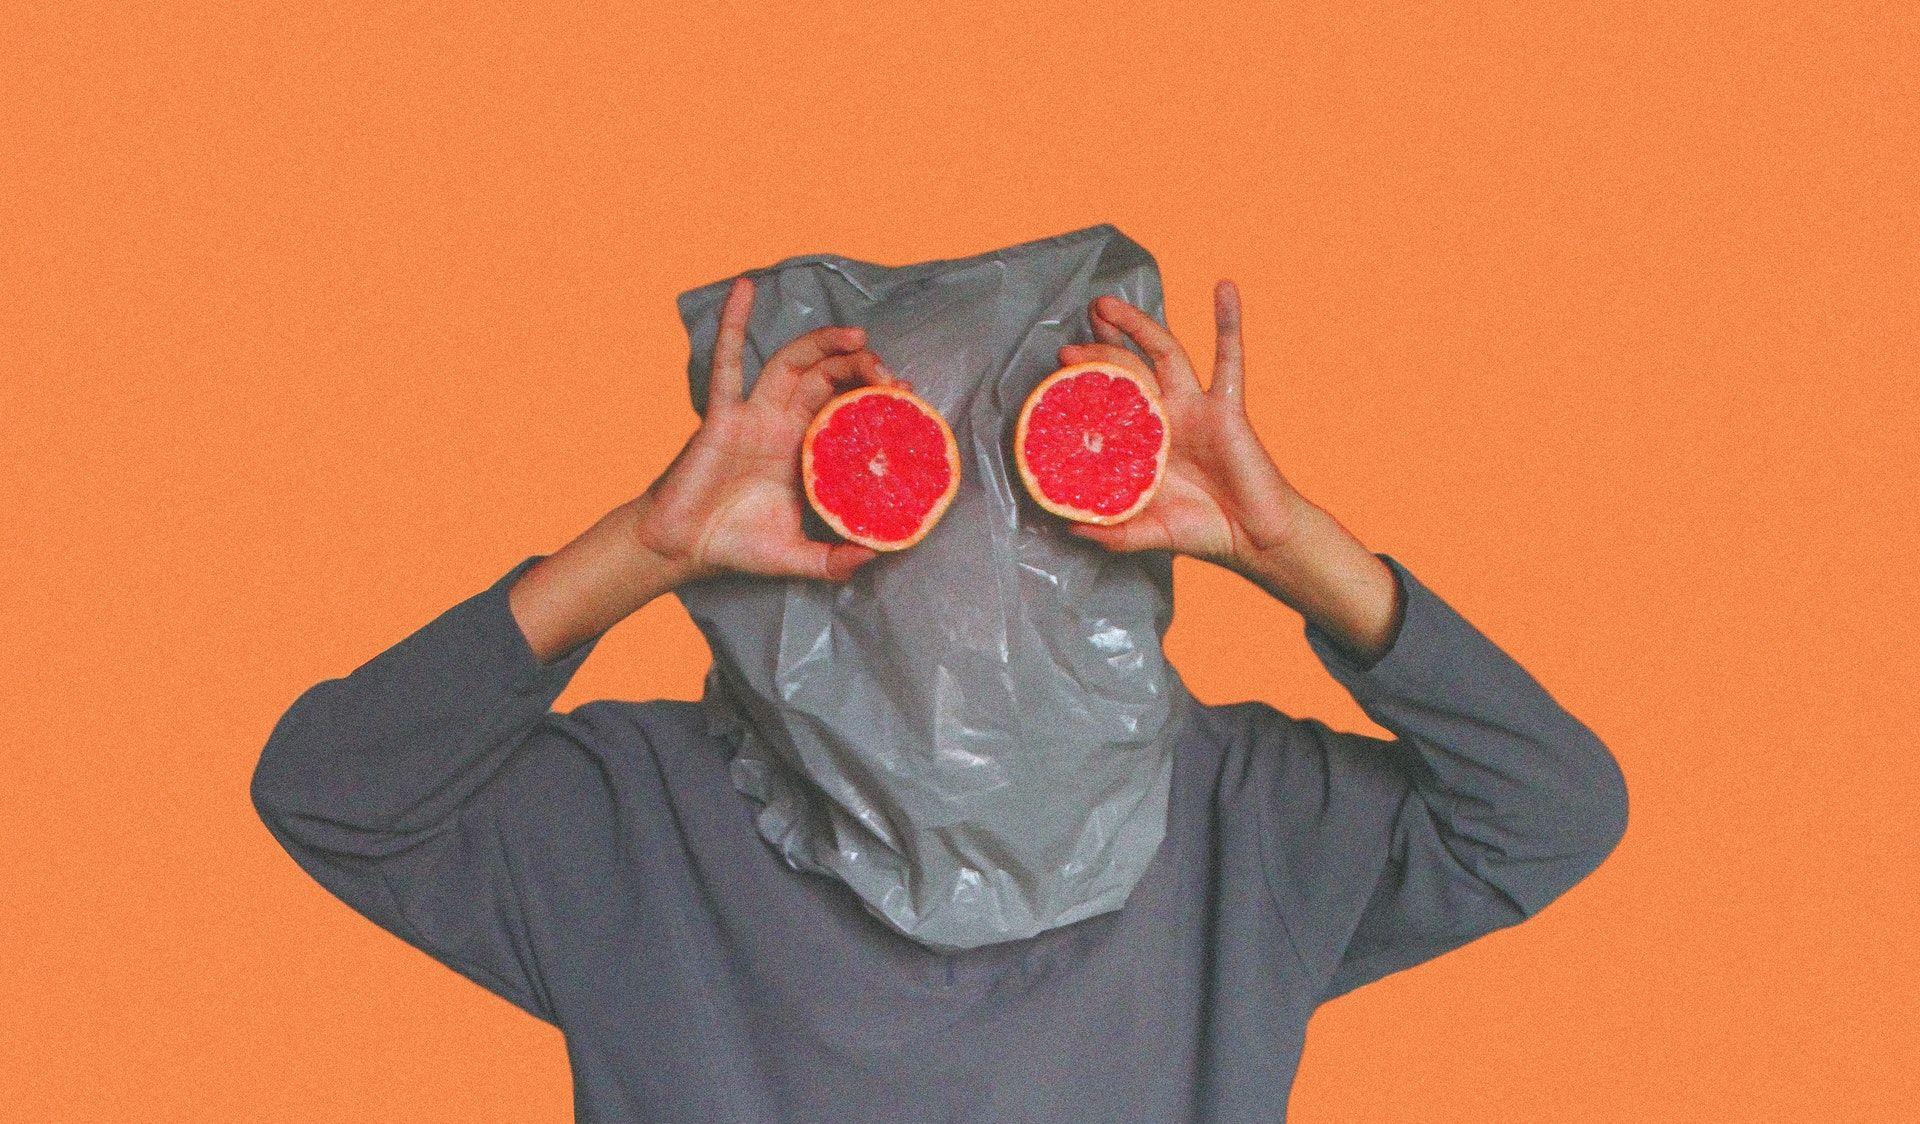 person-covered-with-plastic-bag-on-head-while-holding-sliced-3317038 (1)